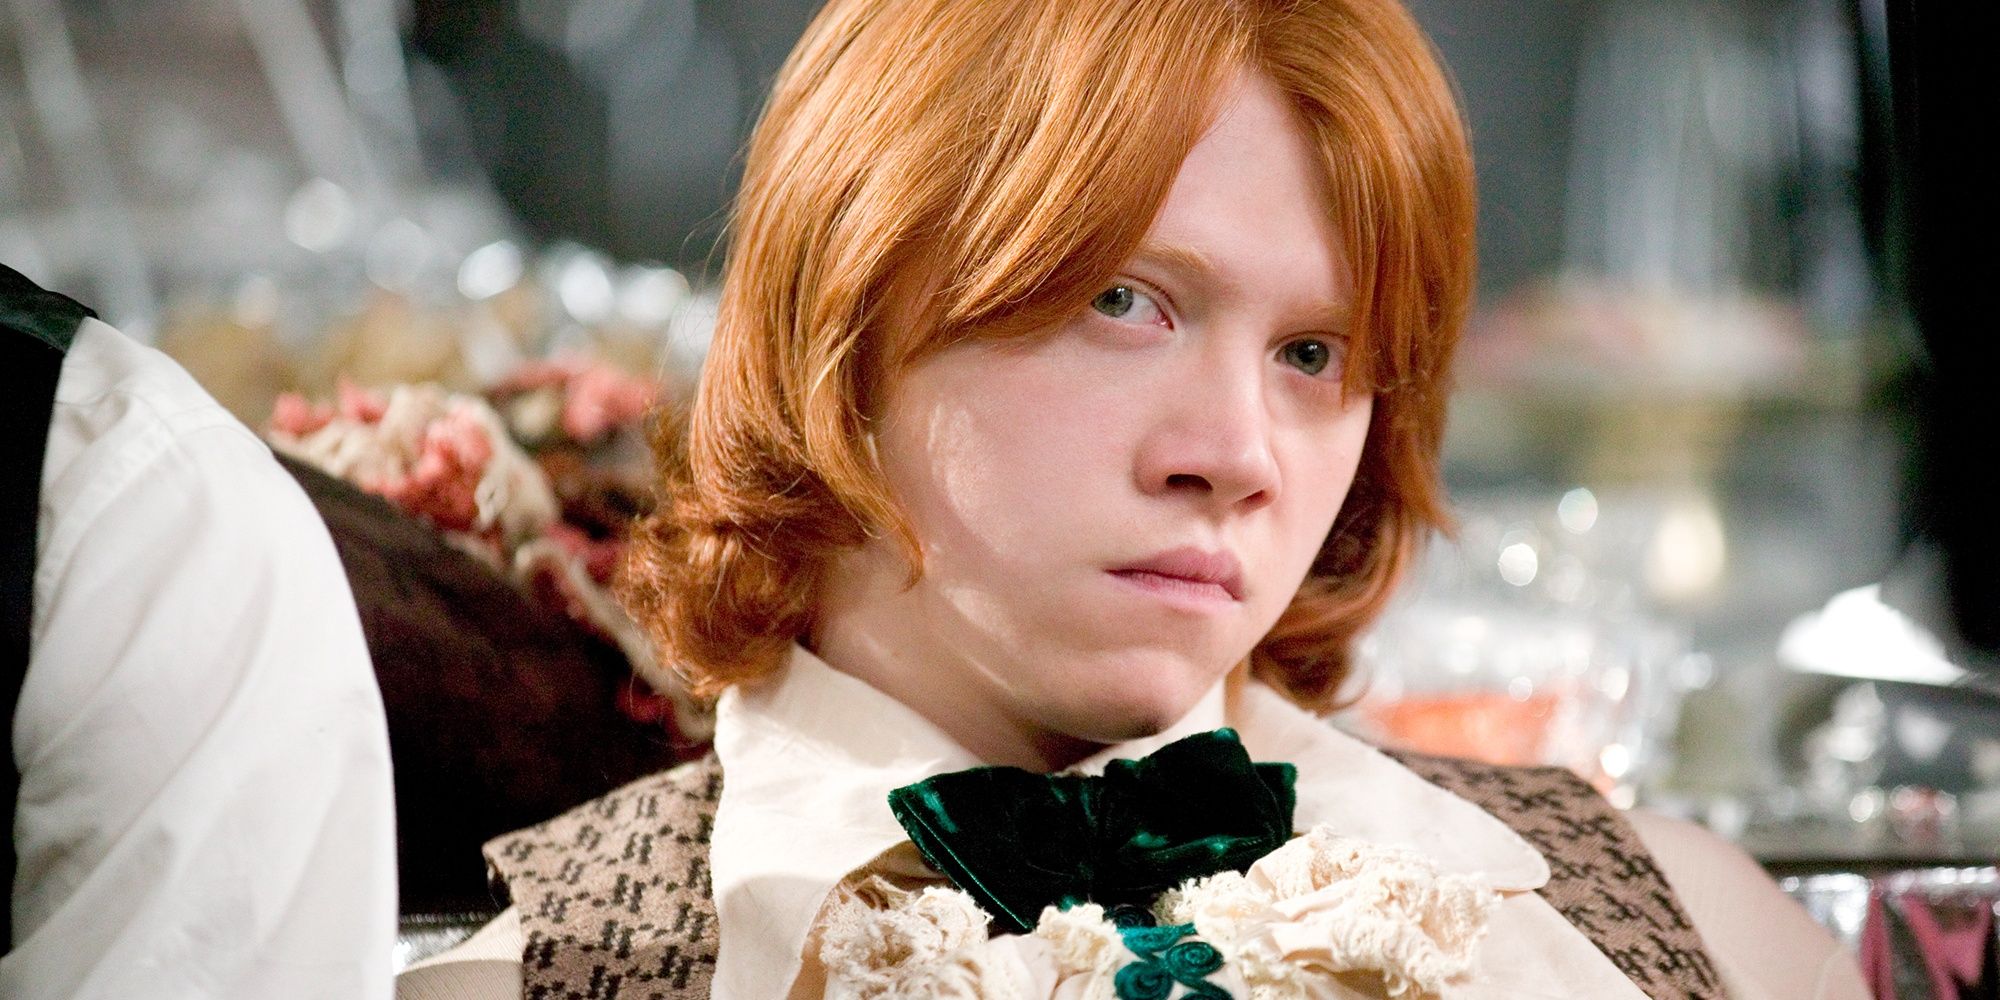 Ron looking angry at the Yule Ball in Harry Potter 4 